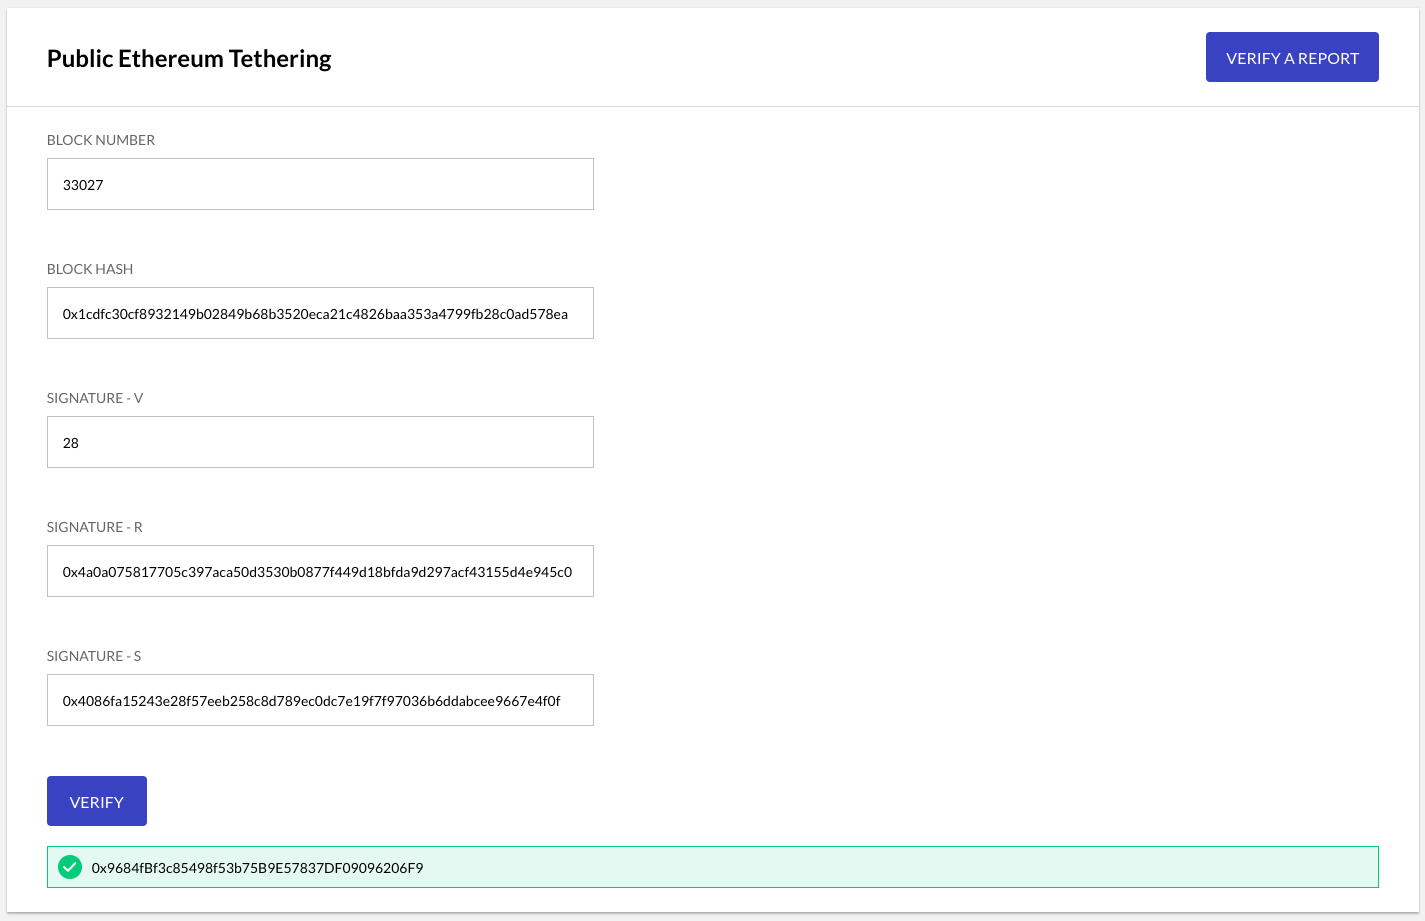 Tether Report Verified Successfully